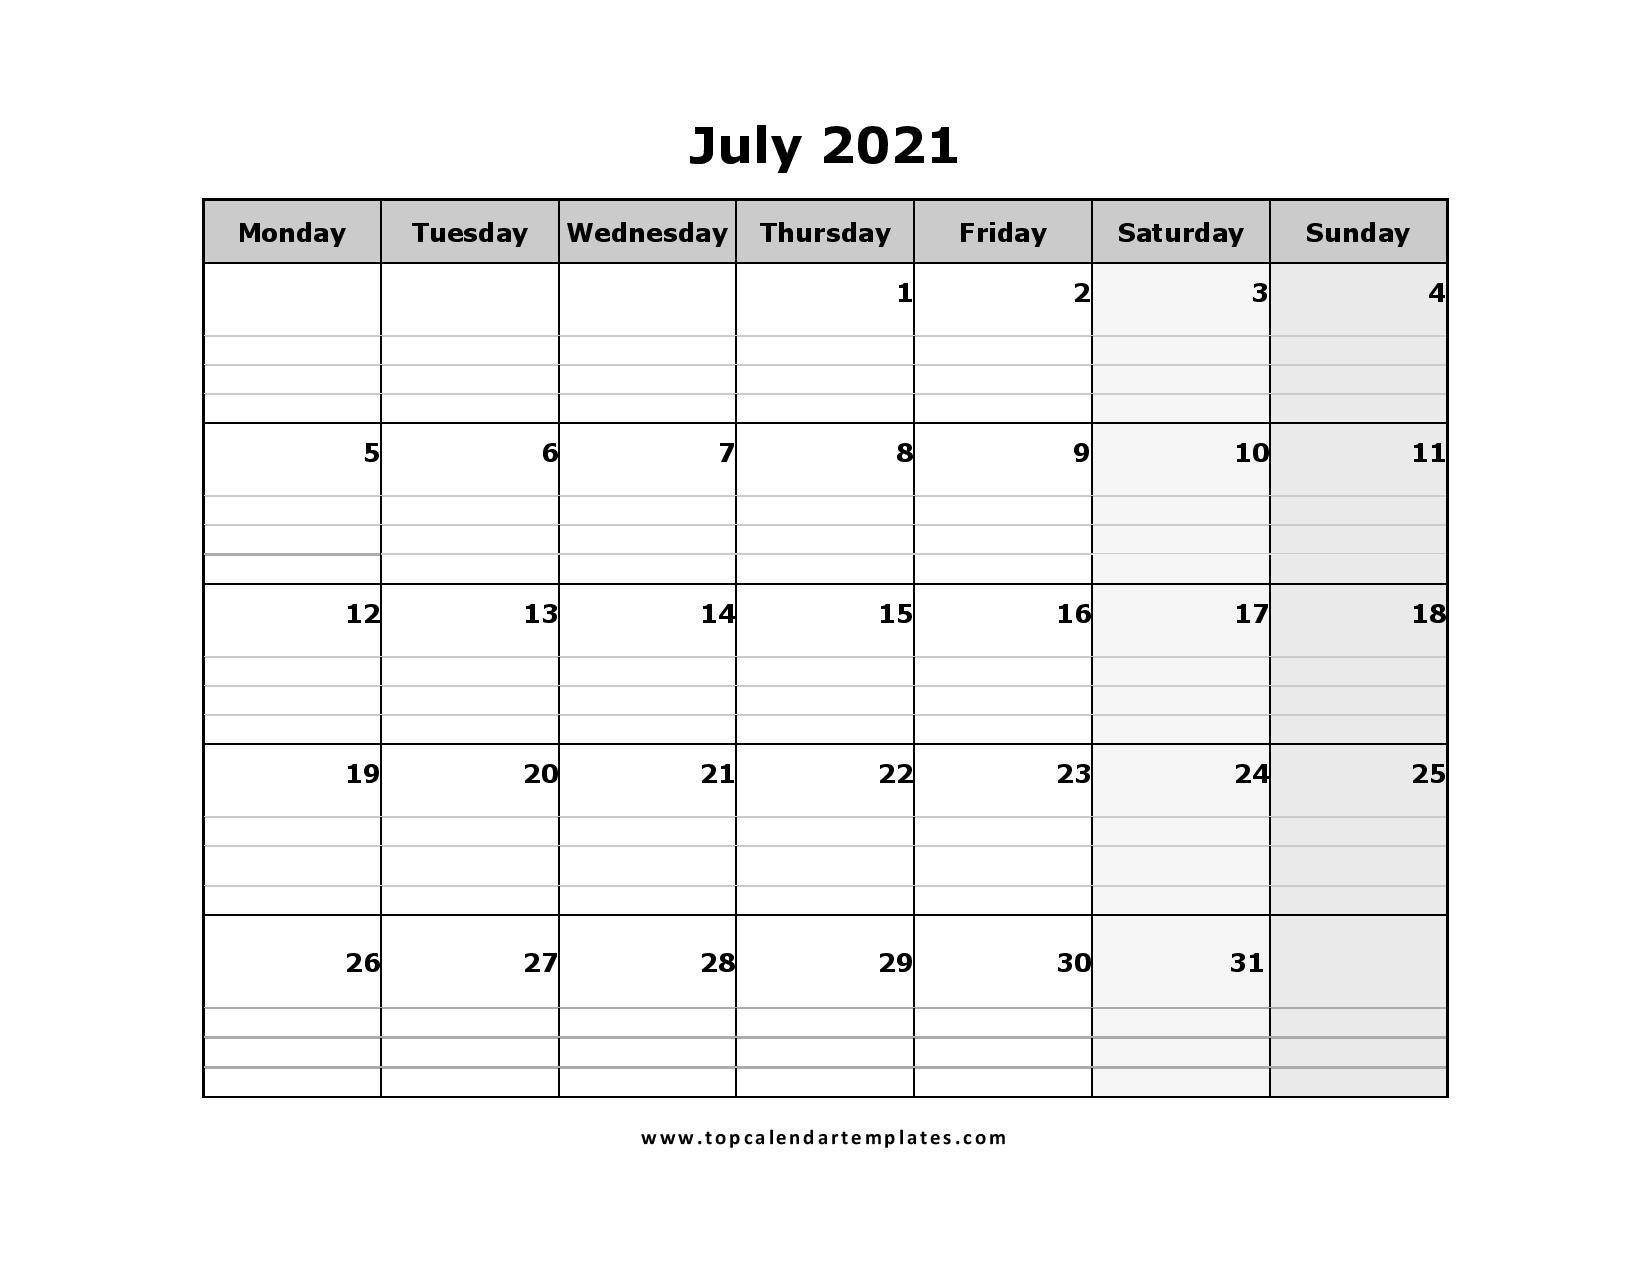 Printable July 2021 Calendar Template - Pdf, Word, Excel-2021 Vacation Schedule Template